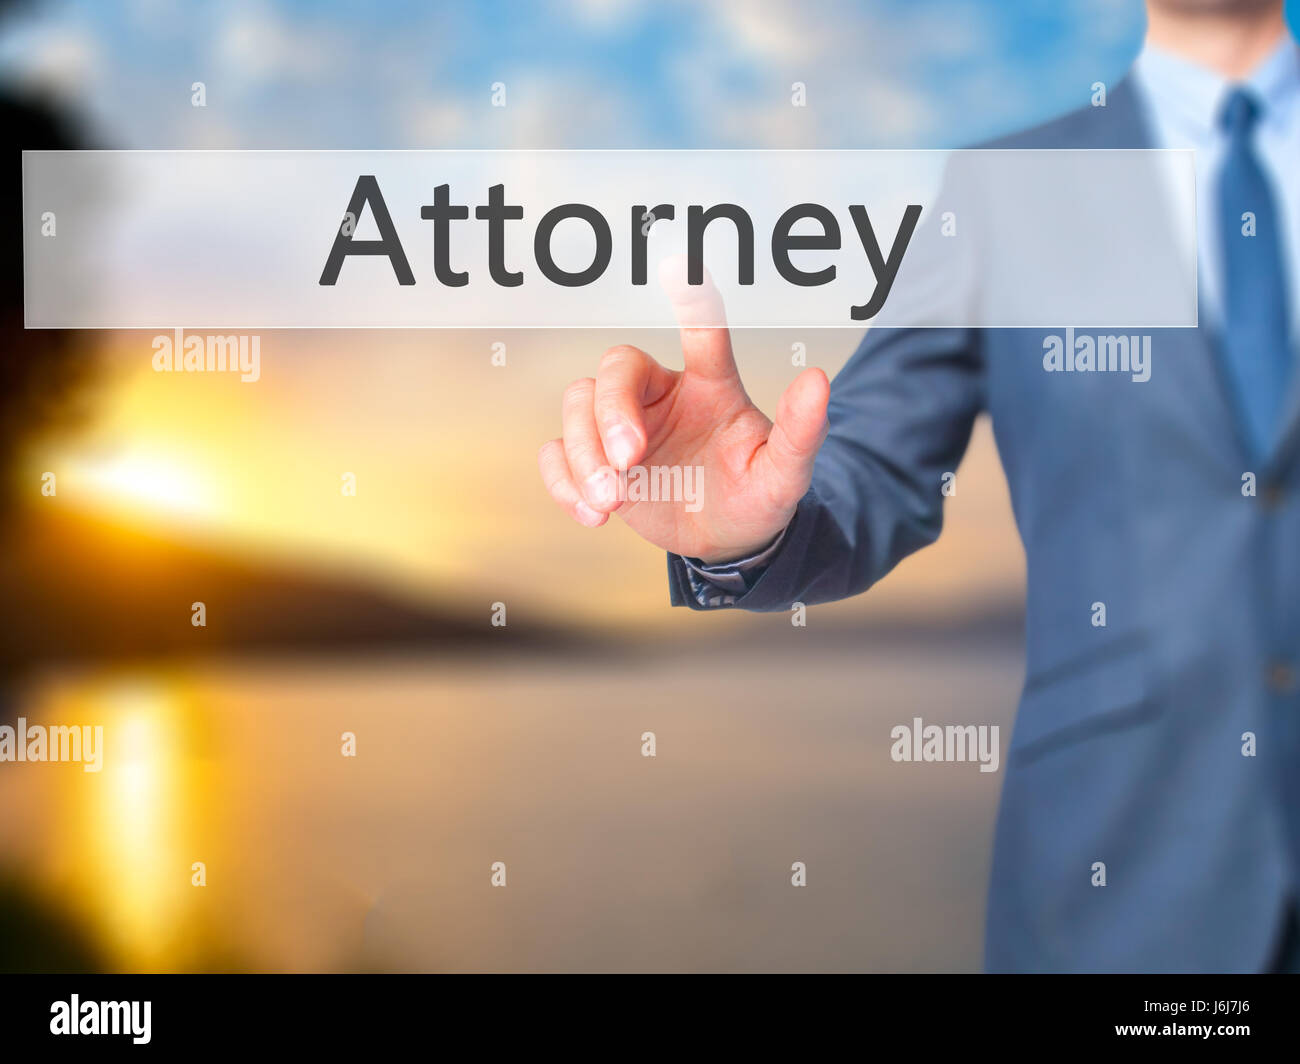 Attorney - Businessman hand pressing button on touch screen interface. Business, technology, internet concept. Stock Photo Stock Photo